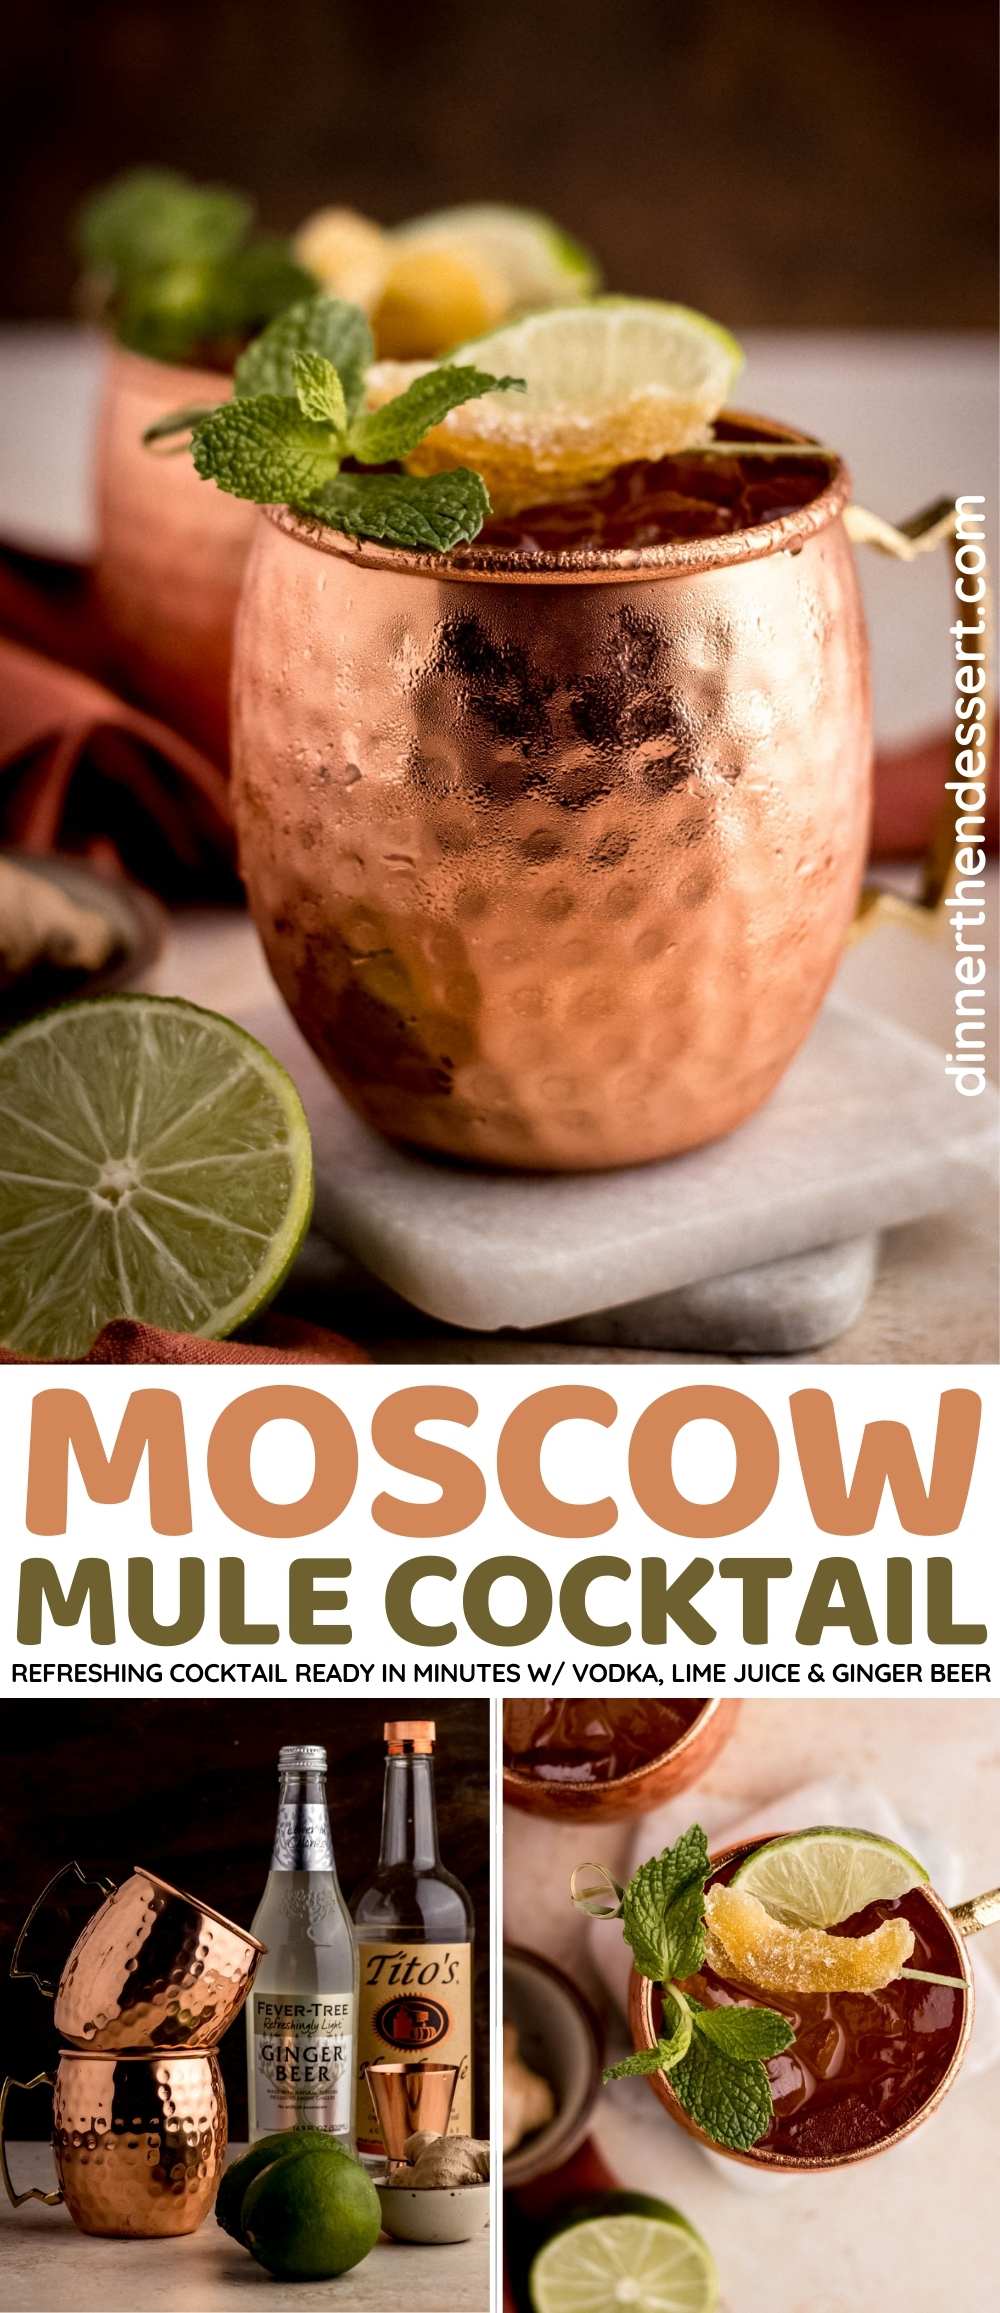 Moscow Mule collage